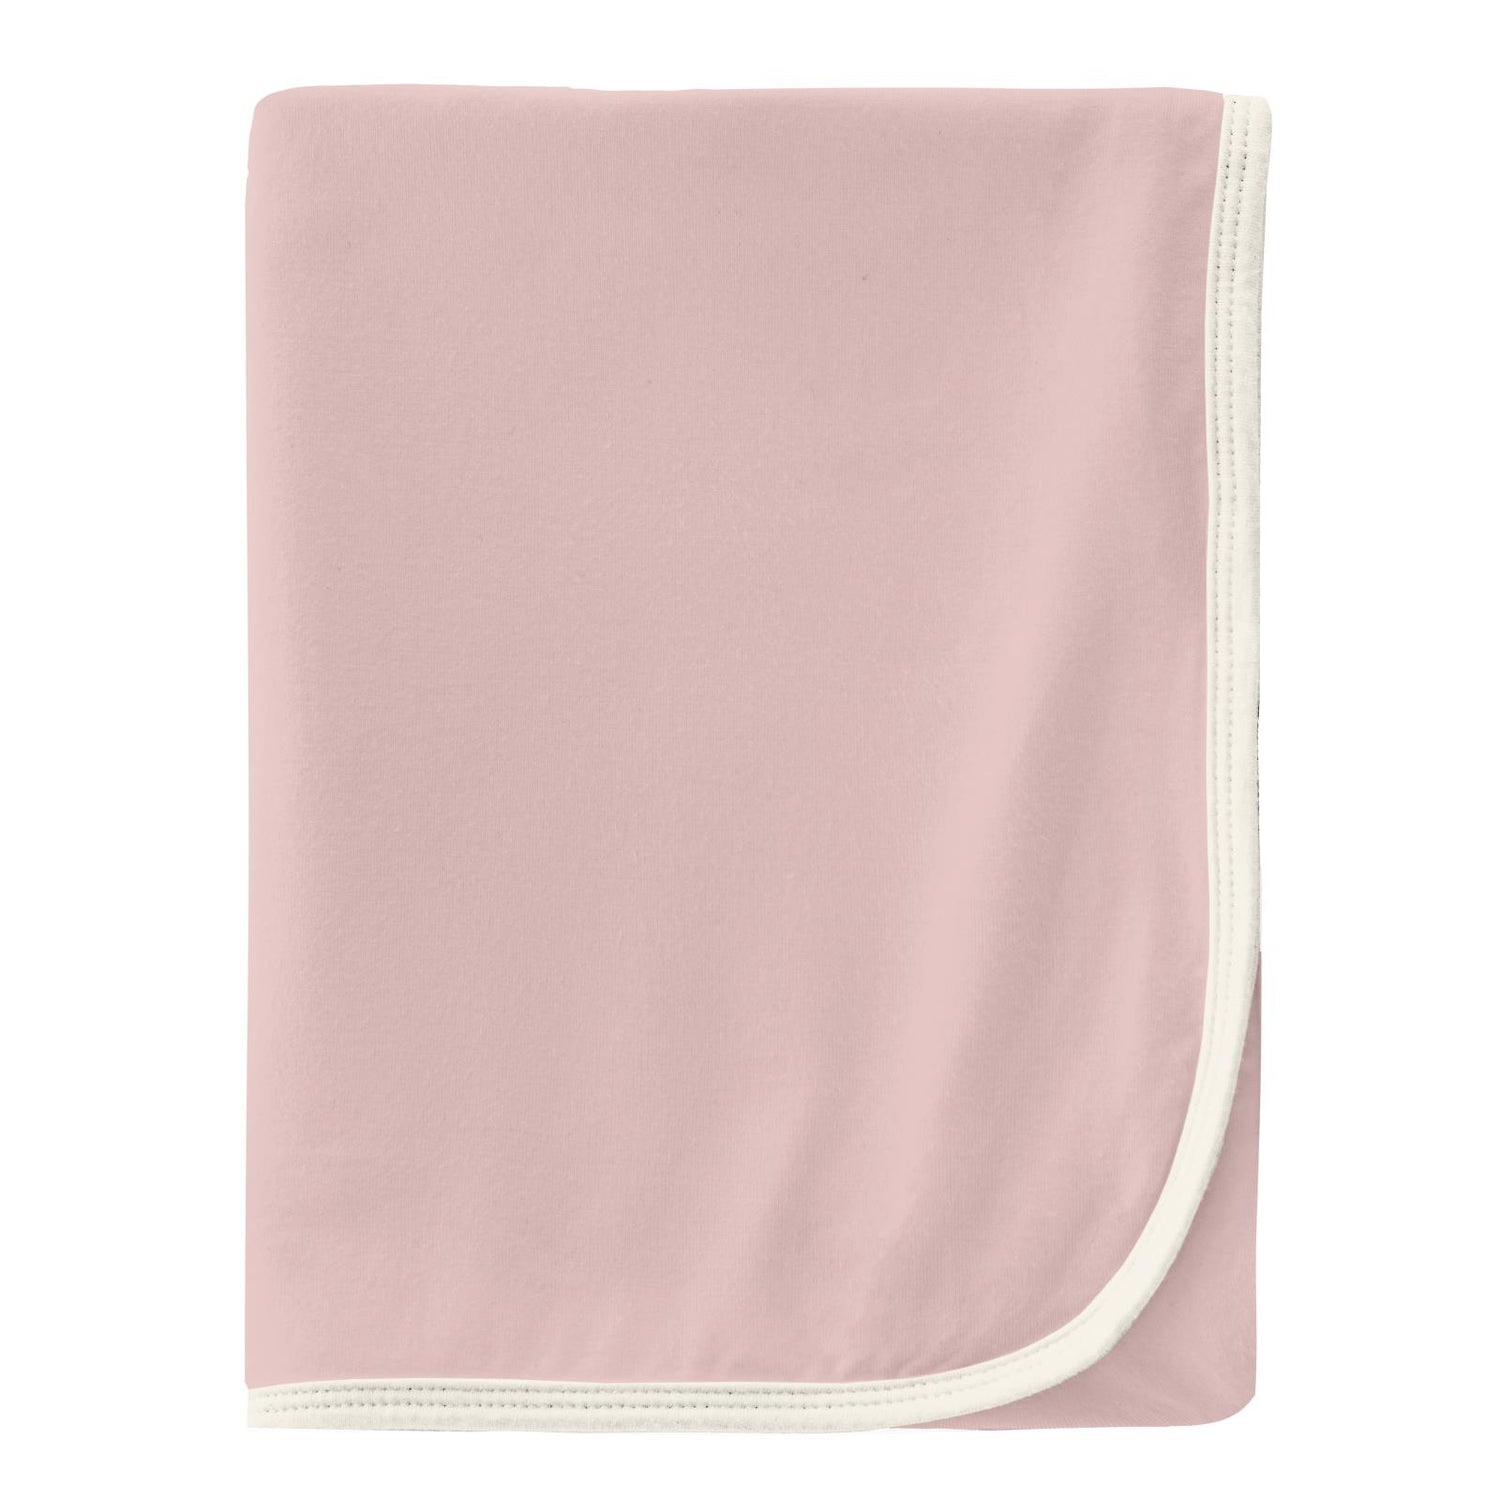 Swaddling Blanket in Baby Rose with Natural